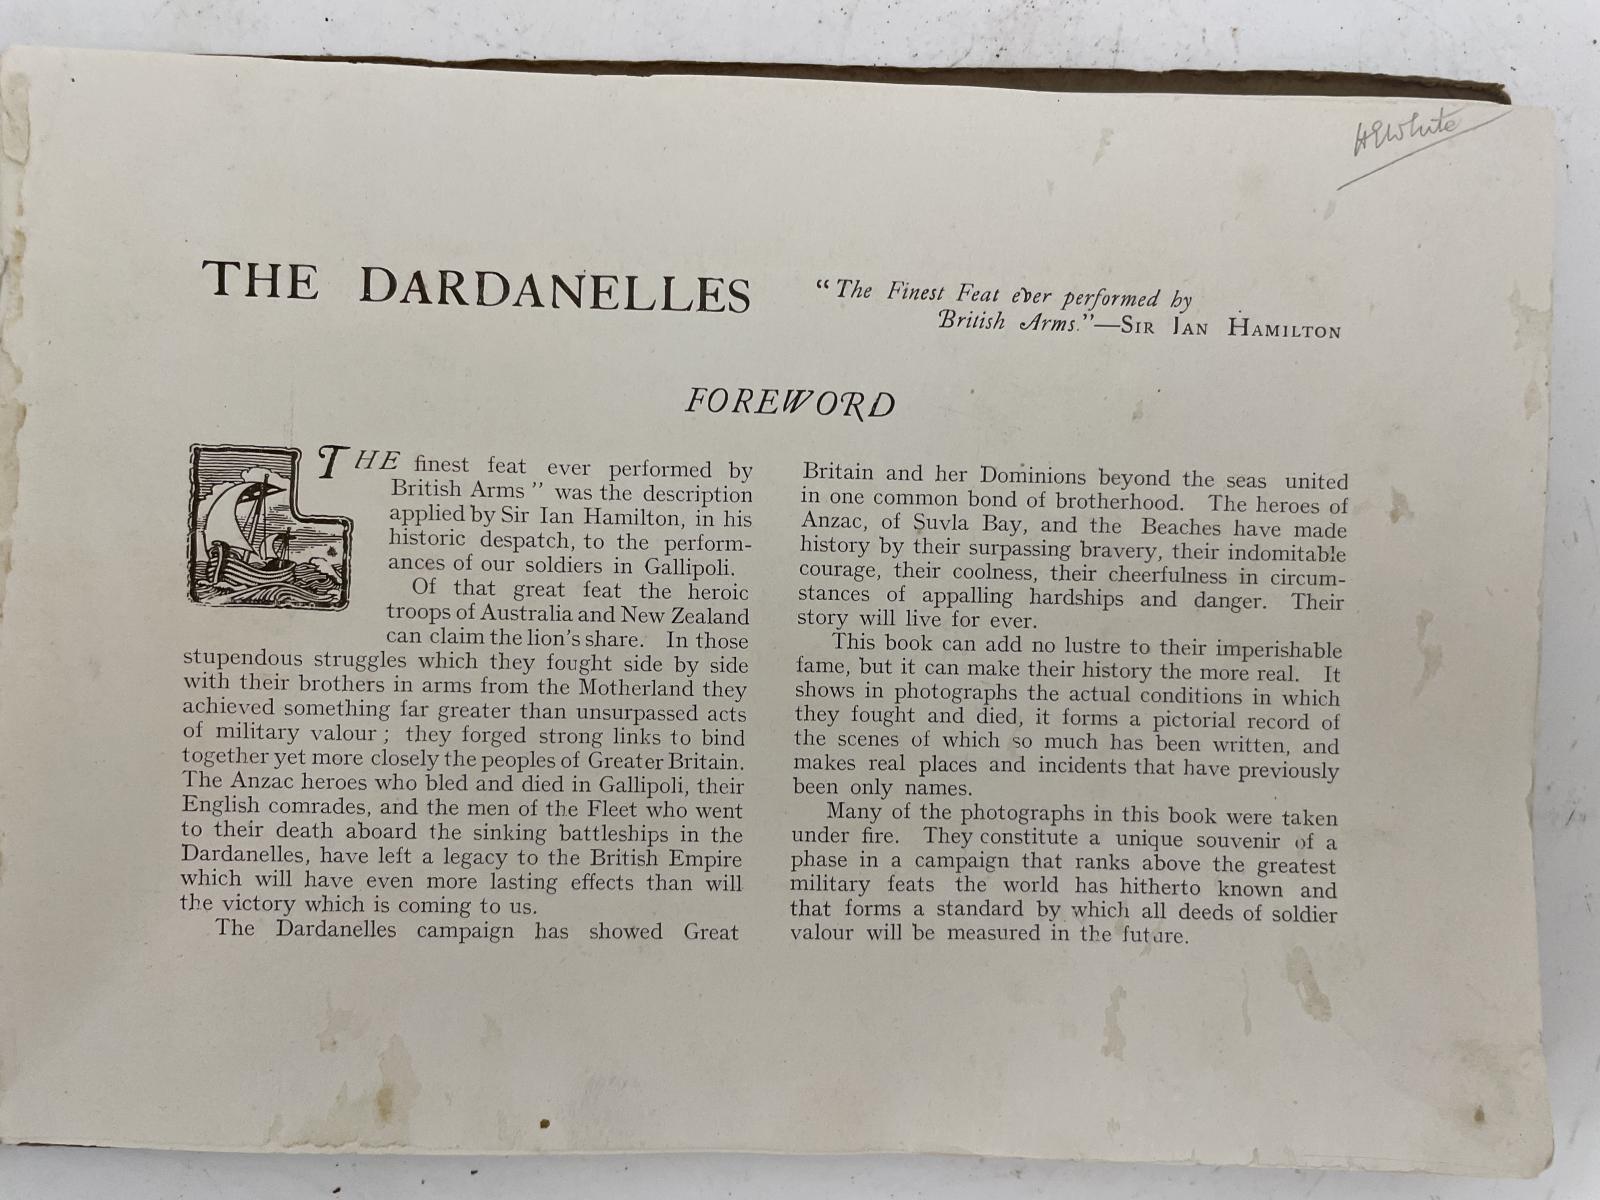 Foreword for  "The Dardanelles"